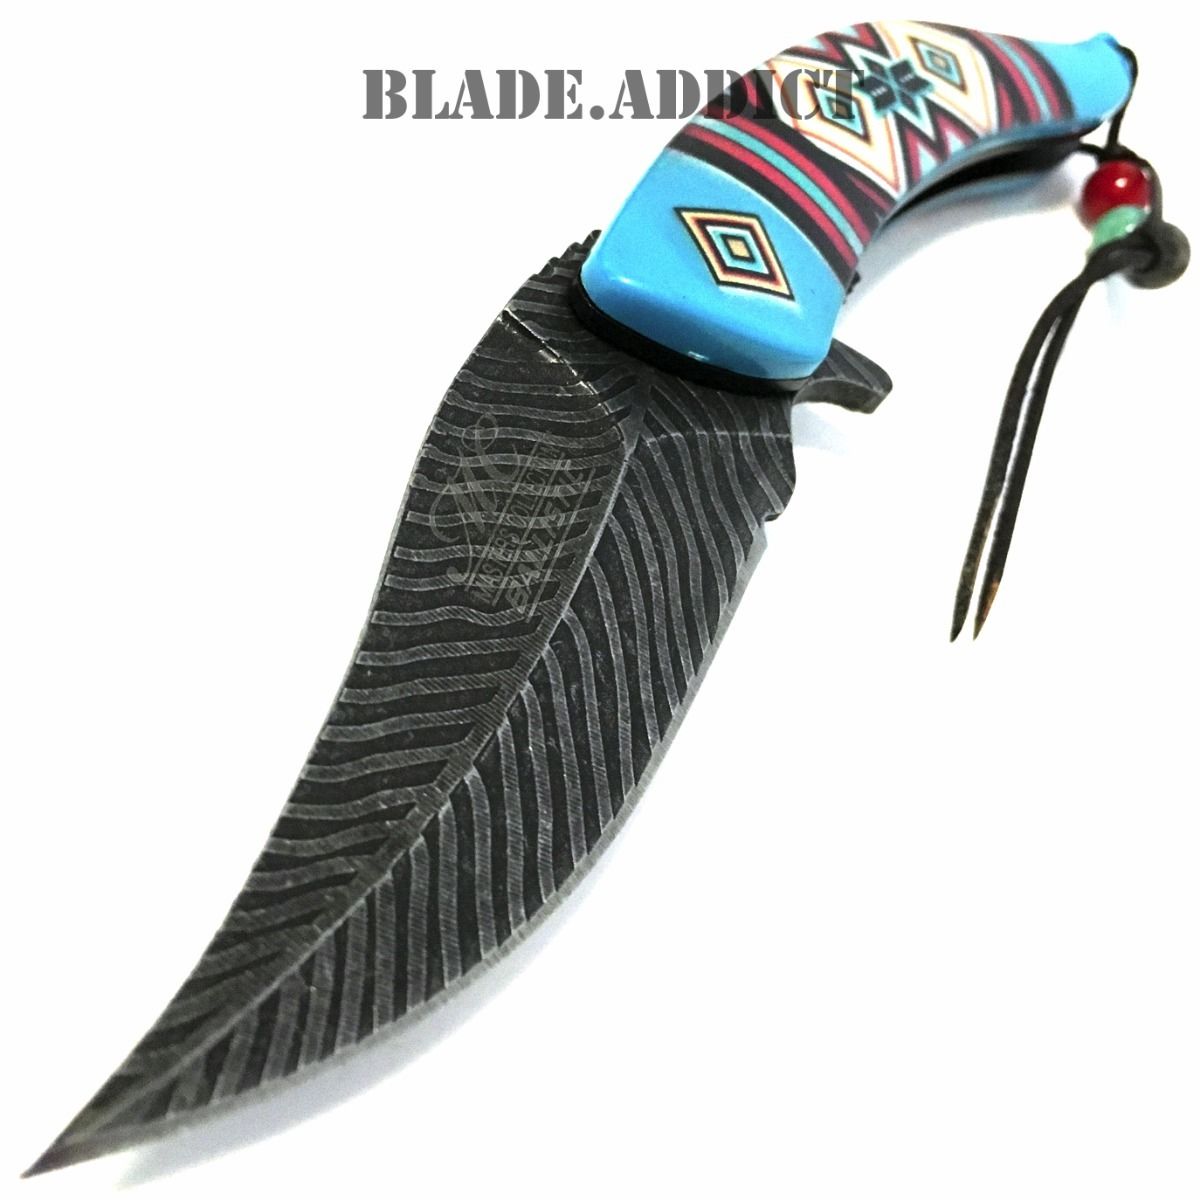 8.5" Native American Indian Spring Assisted Open Pocket Knife Damascus Feather  BL